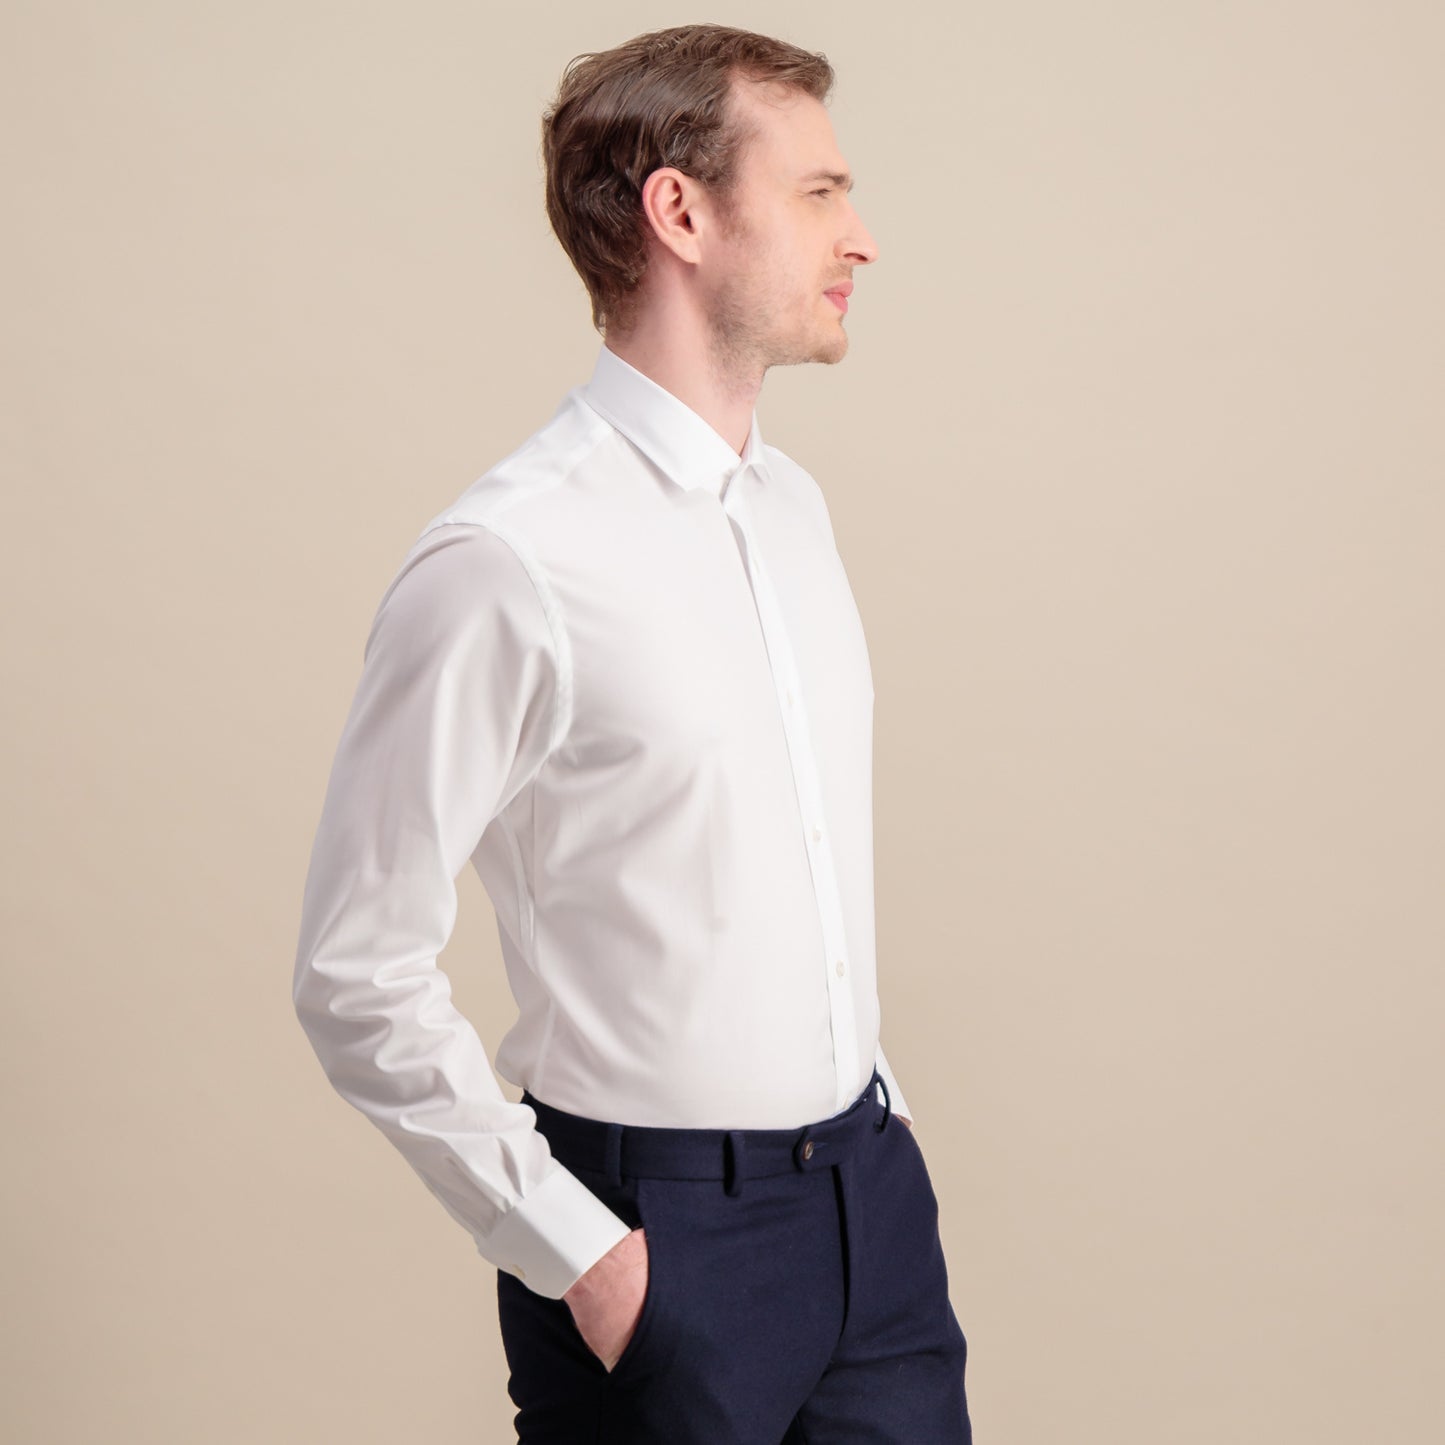 Fitted shirt in natural stretch white twill